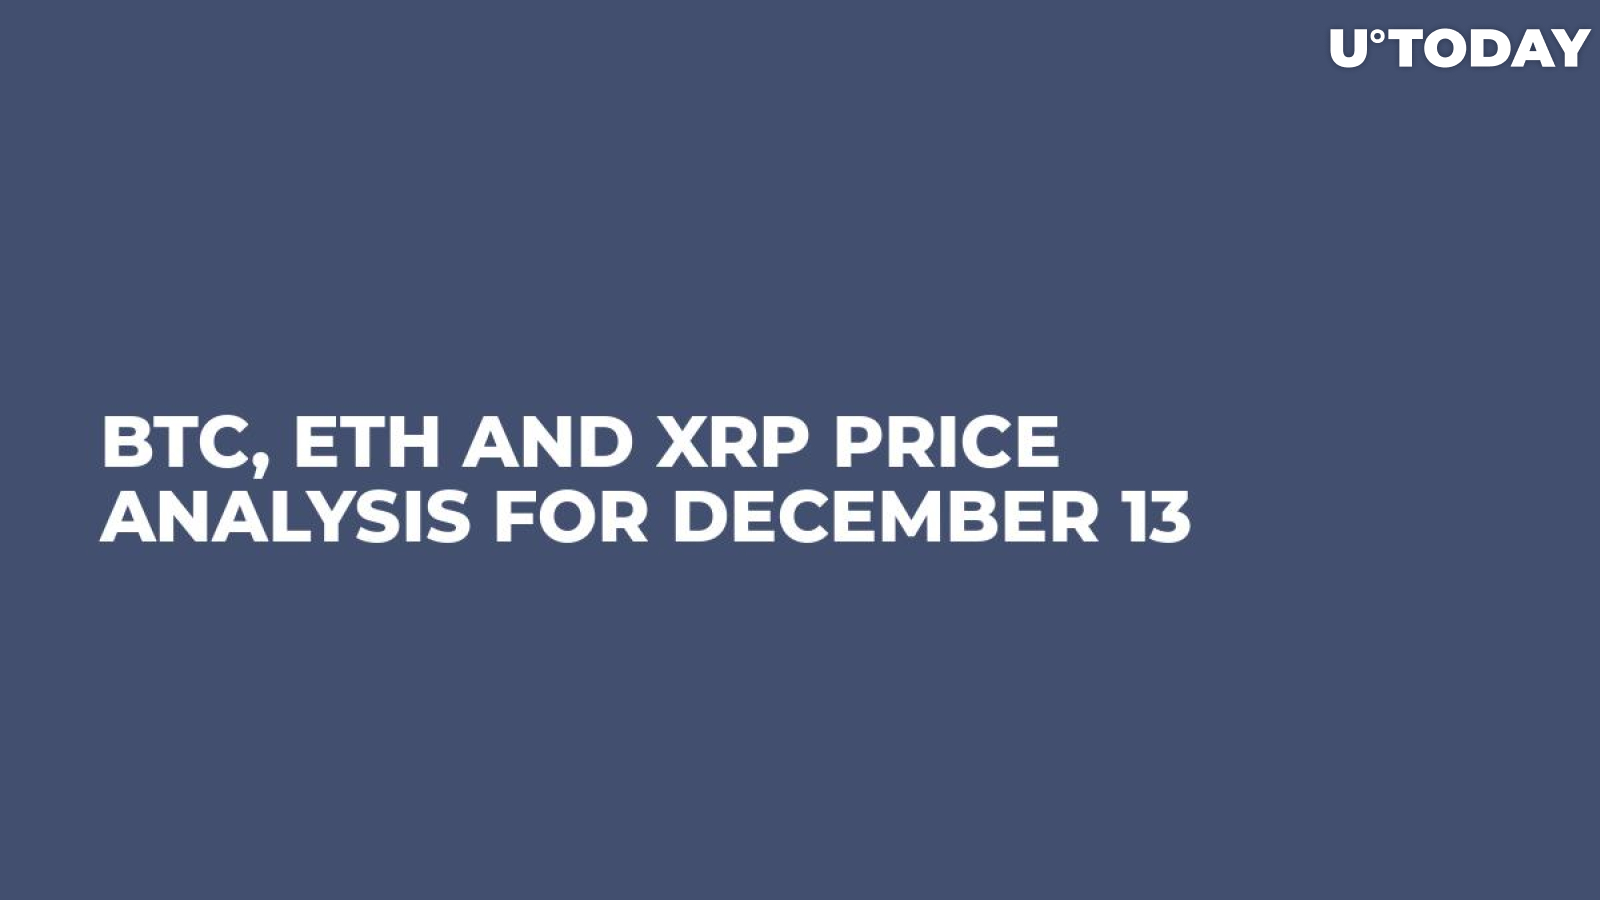 BTC, ETH and XRP Price Analysis for December 13